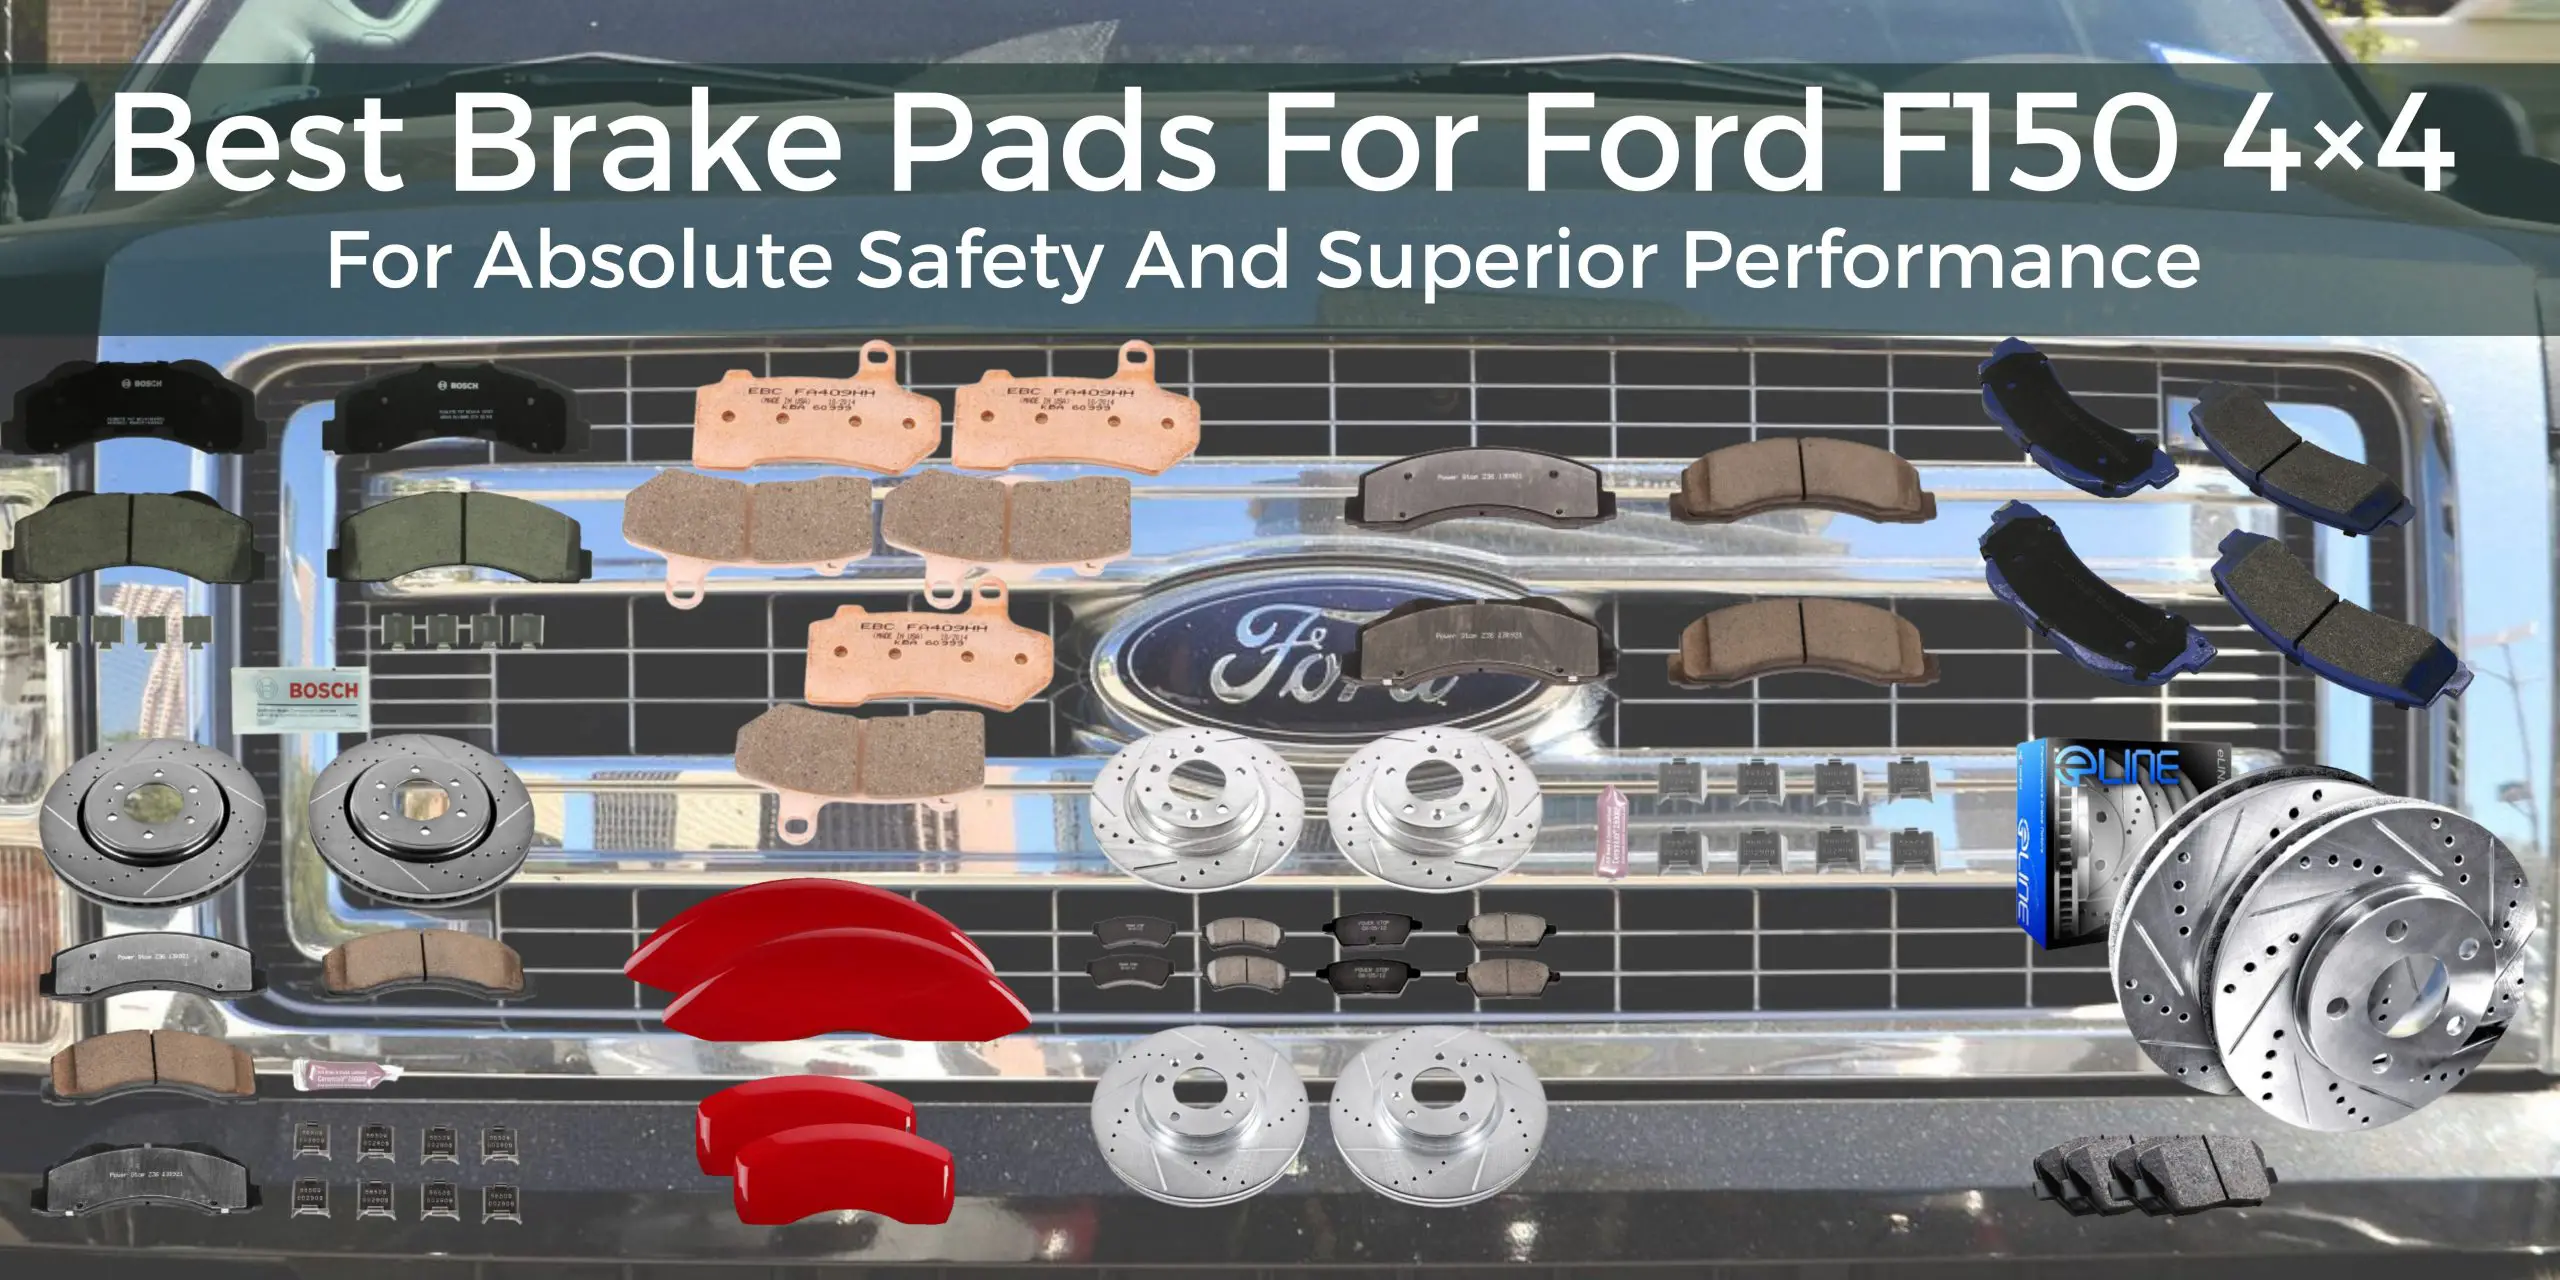 Best Brake Pads for Ford F150 4x4